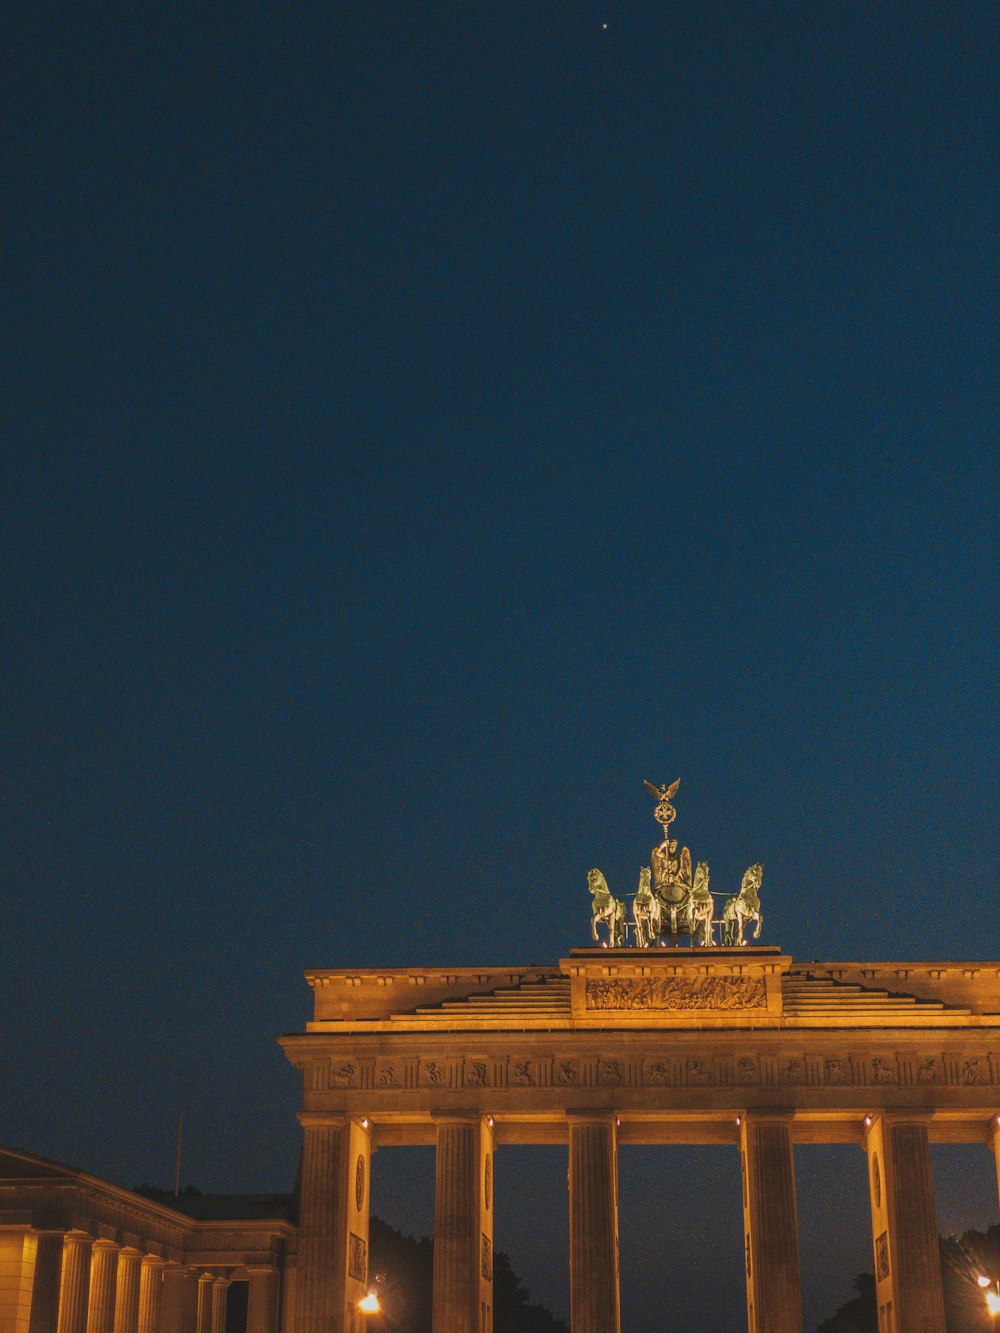 a night view of a building with a statue on top of it